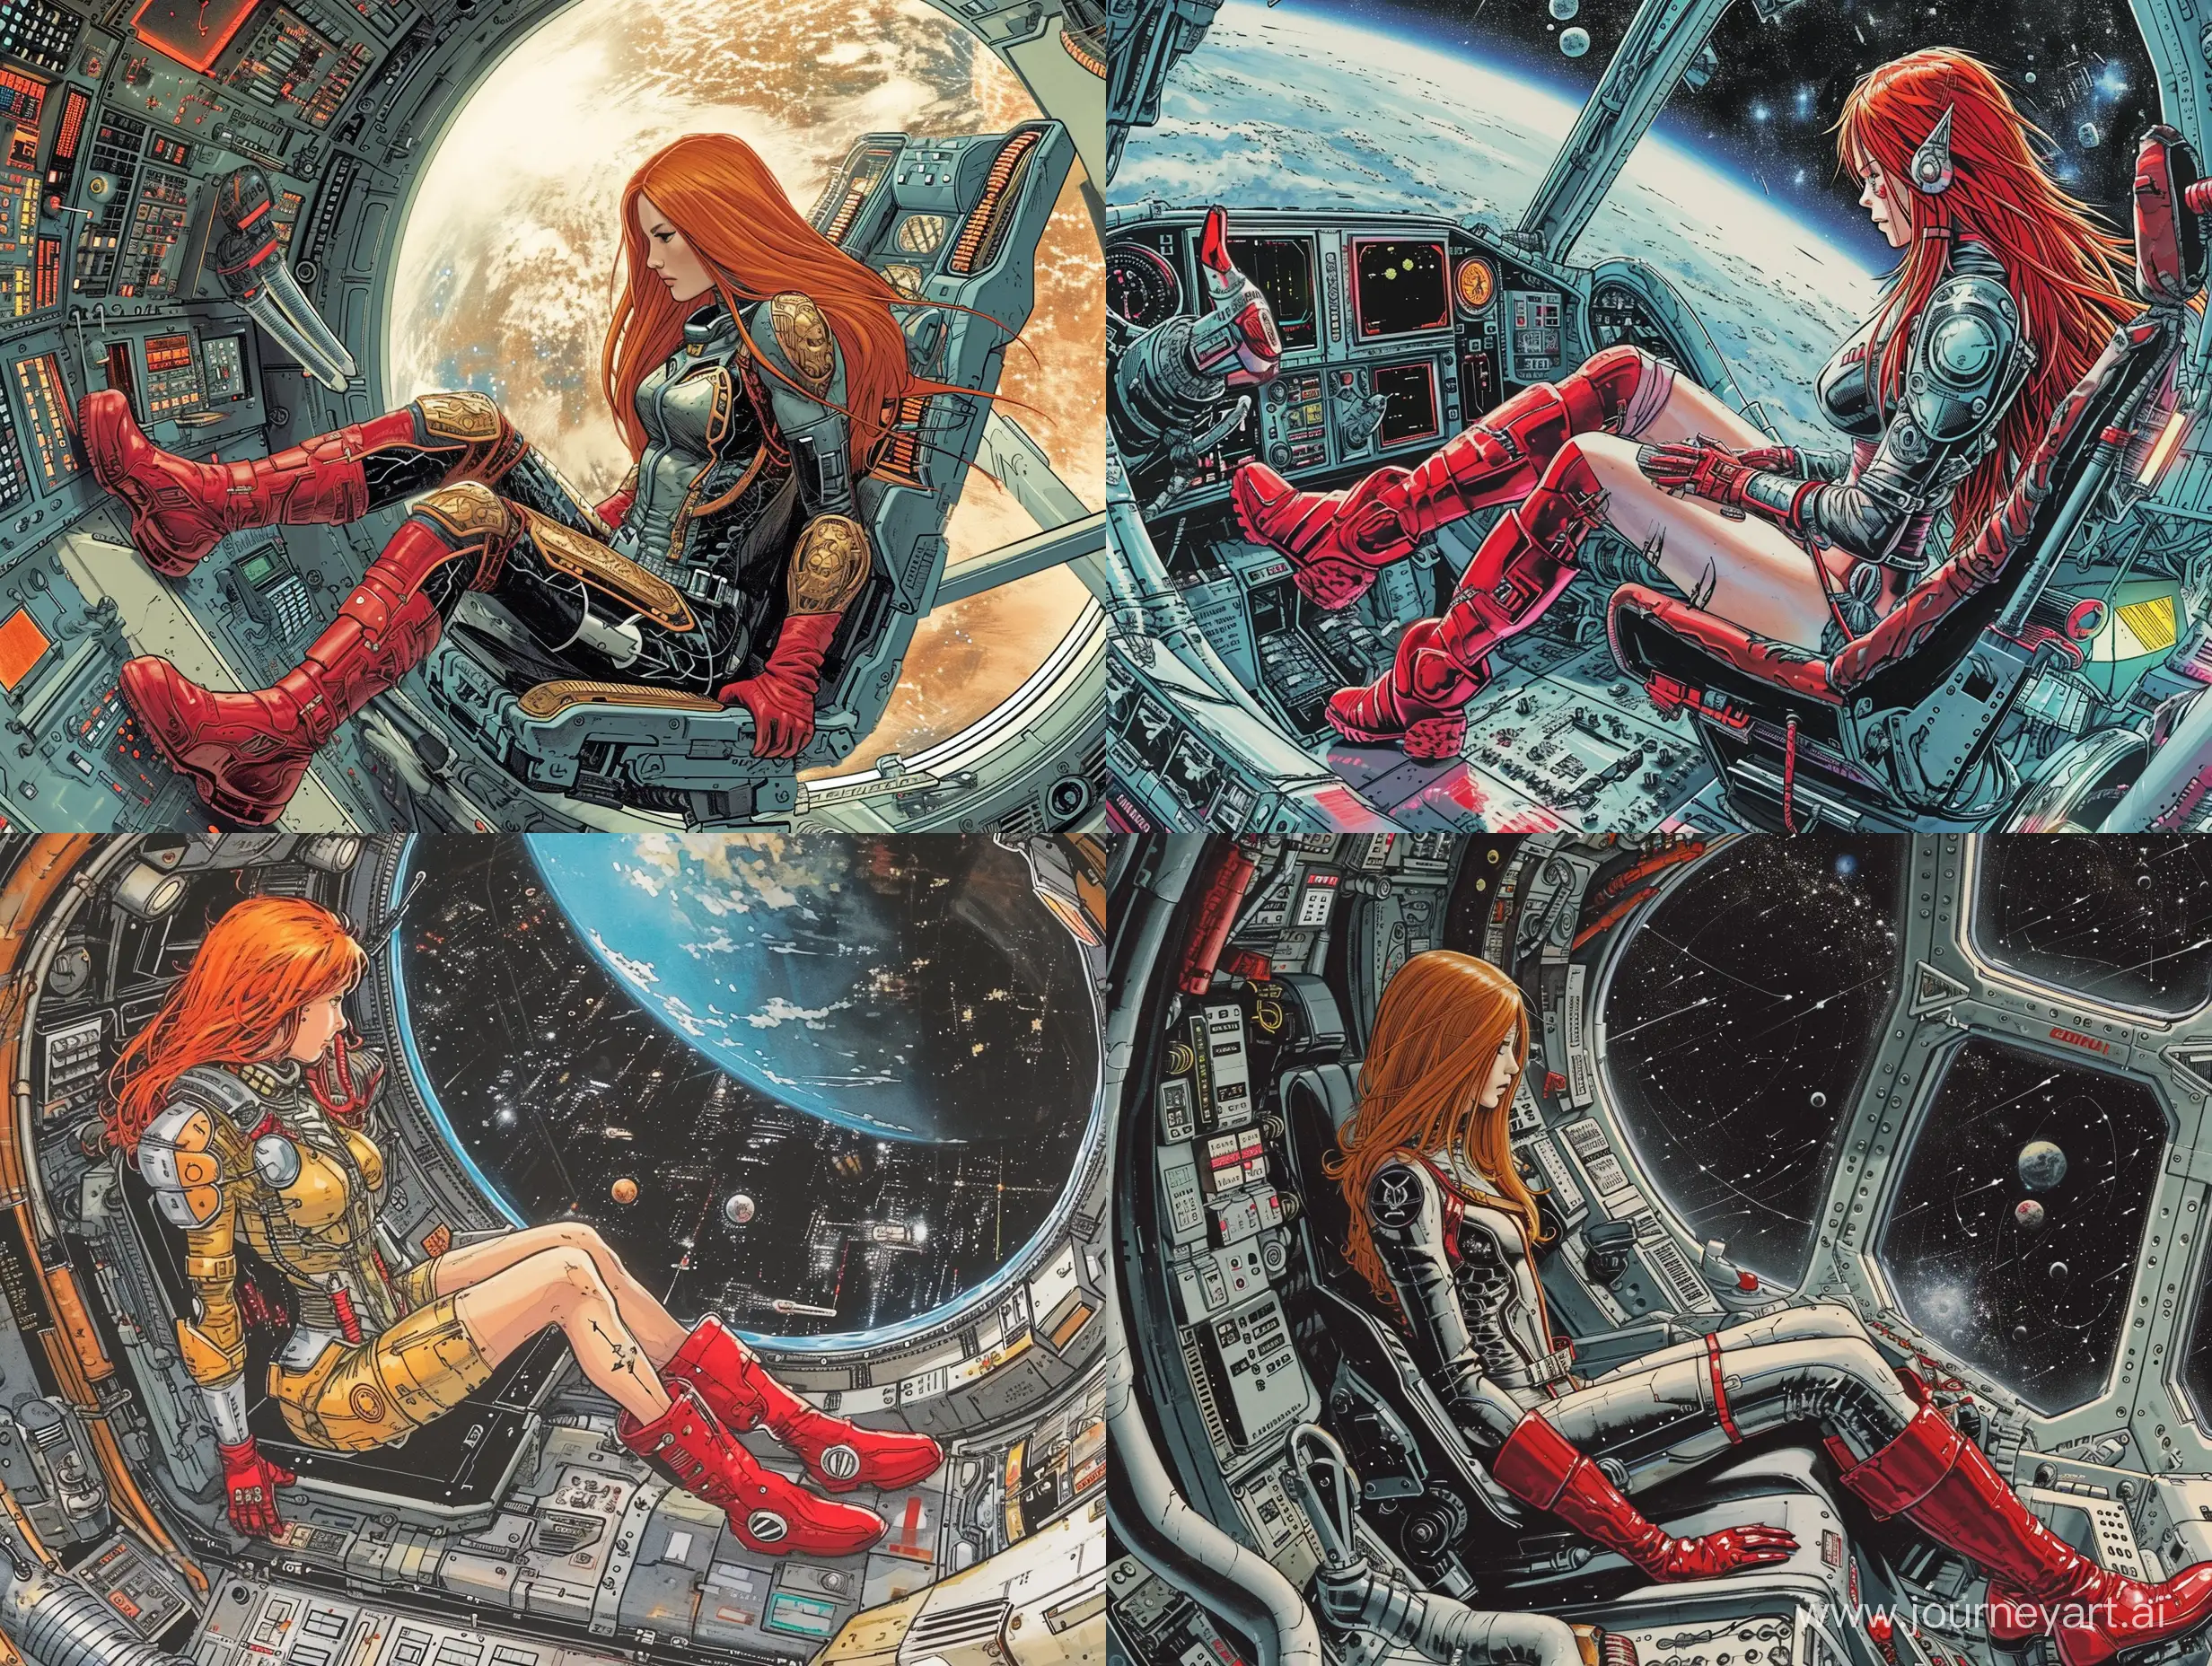 Dynamic-RedHaired-Girl-Pilot-in-Armor-at-Spaceship-Interior